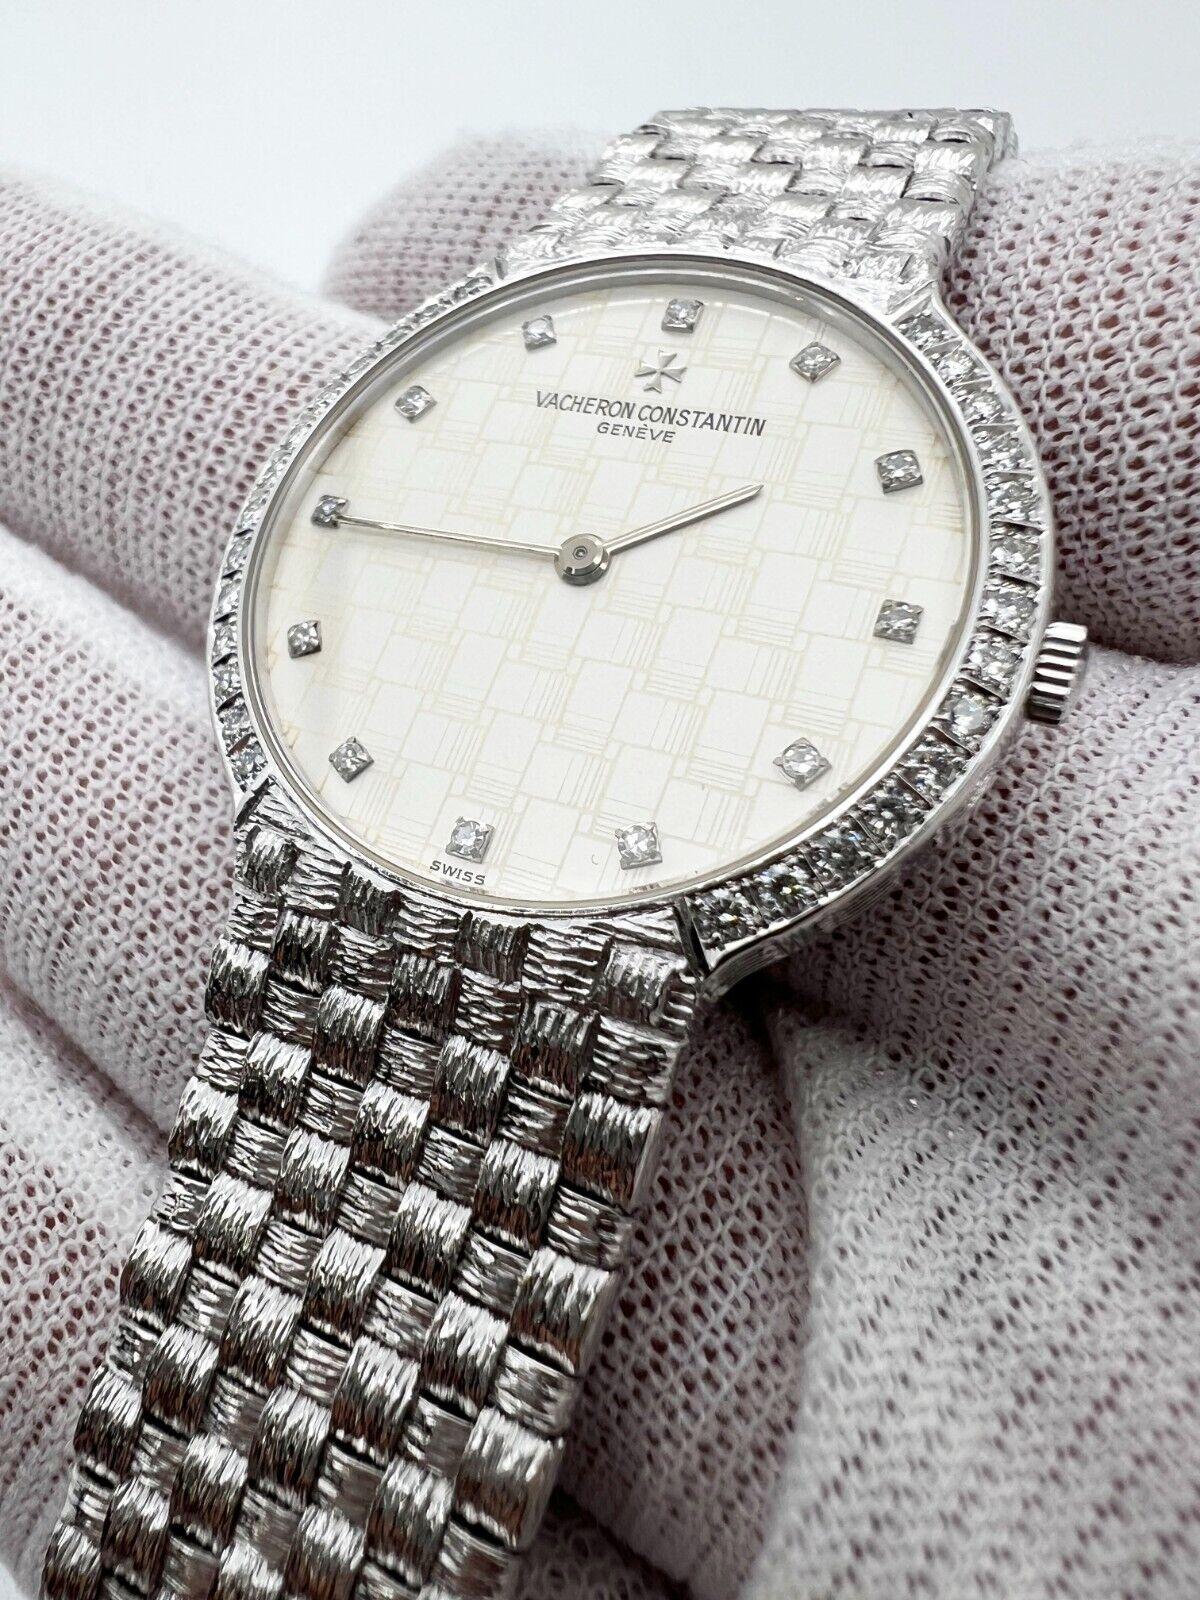 Model: Patrimony
 
Case Material: 18K White Gold
 
Band: 18K White Gold
 
Bezel: 18K White Gold
 
Dial: Diamond Dial 
 
Face: Sapphire Crystal 
 
Case Size: 32mm 
 
Includes: 
-Elegant Watch Box
-Certified Appraisal 
-1 Year Warranty